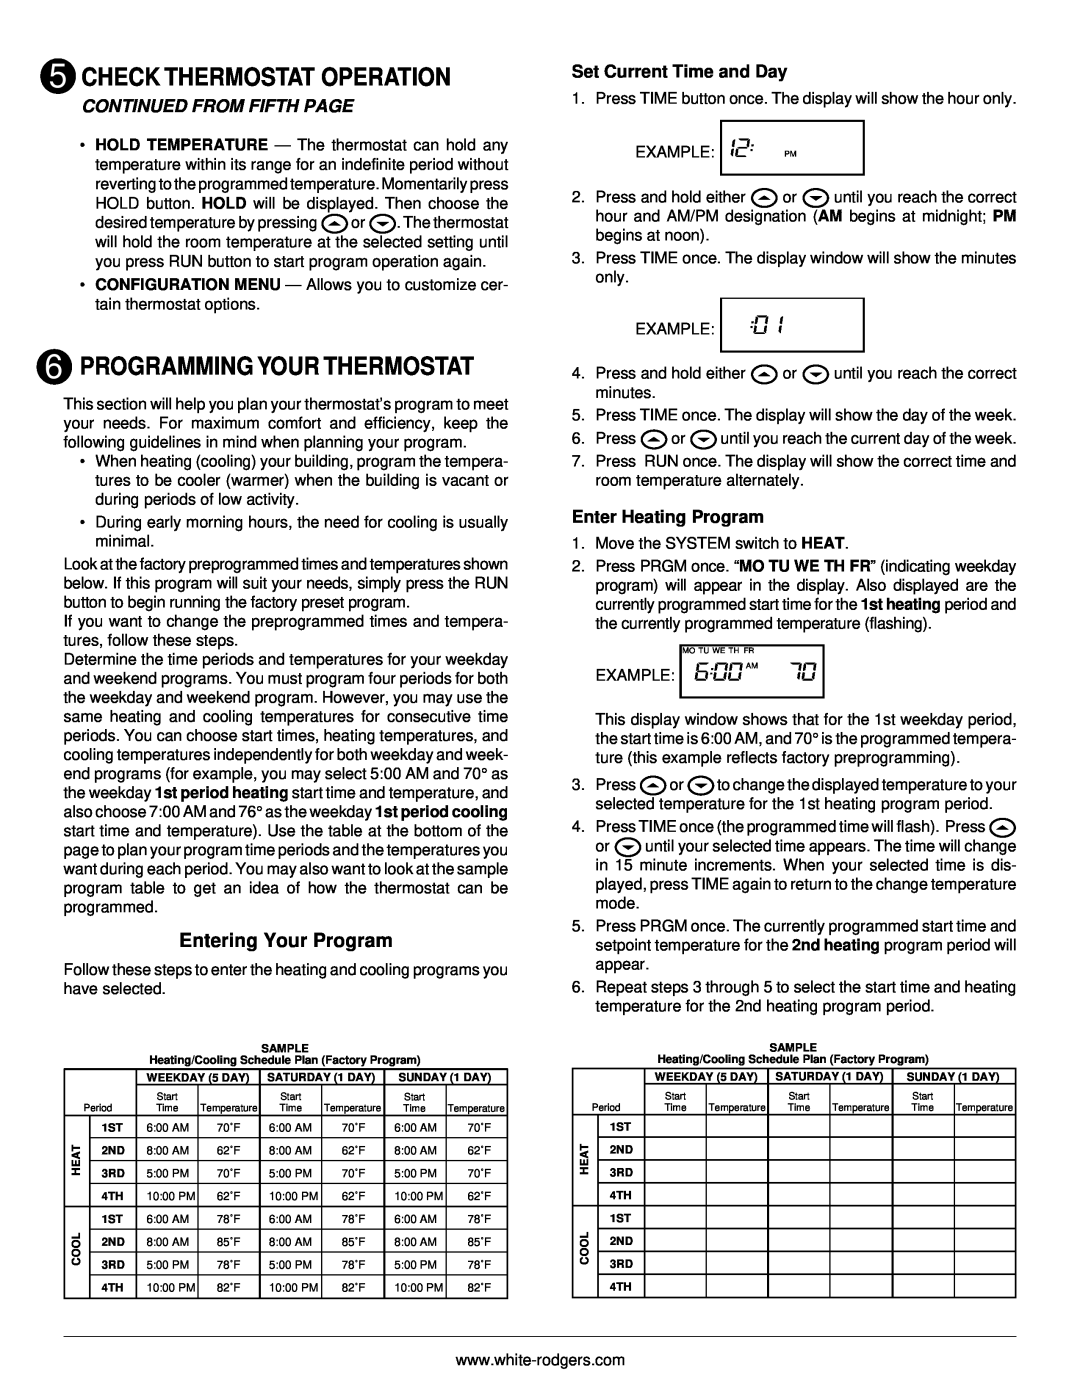 Emerson 850 Programming Your Thermostat, Entering Your Program, Continued From Fifth Page, Set Current Time and Day 